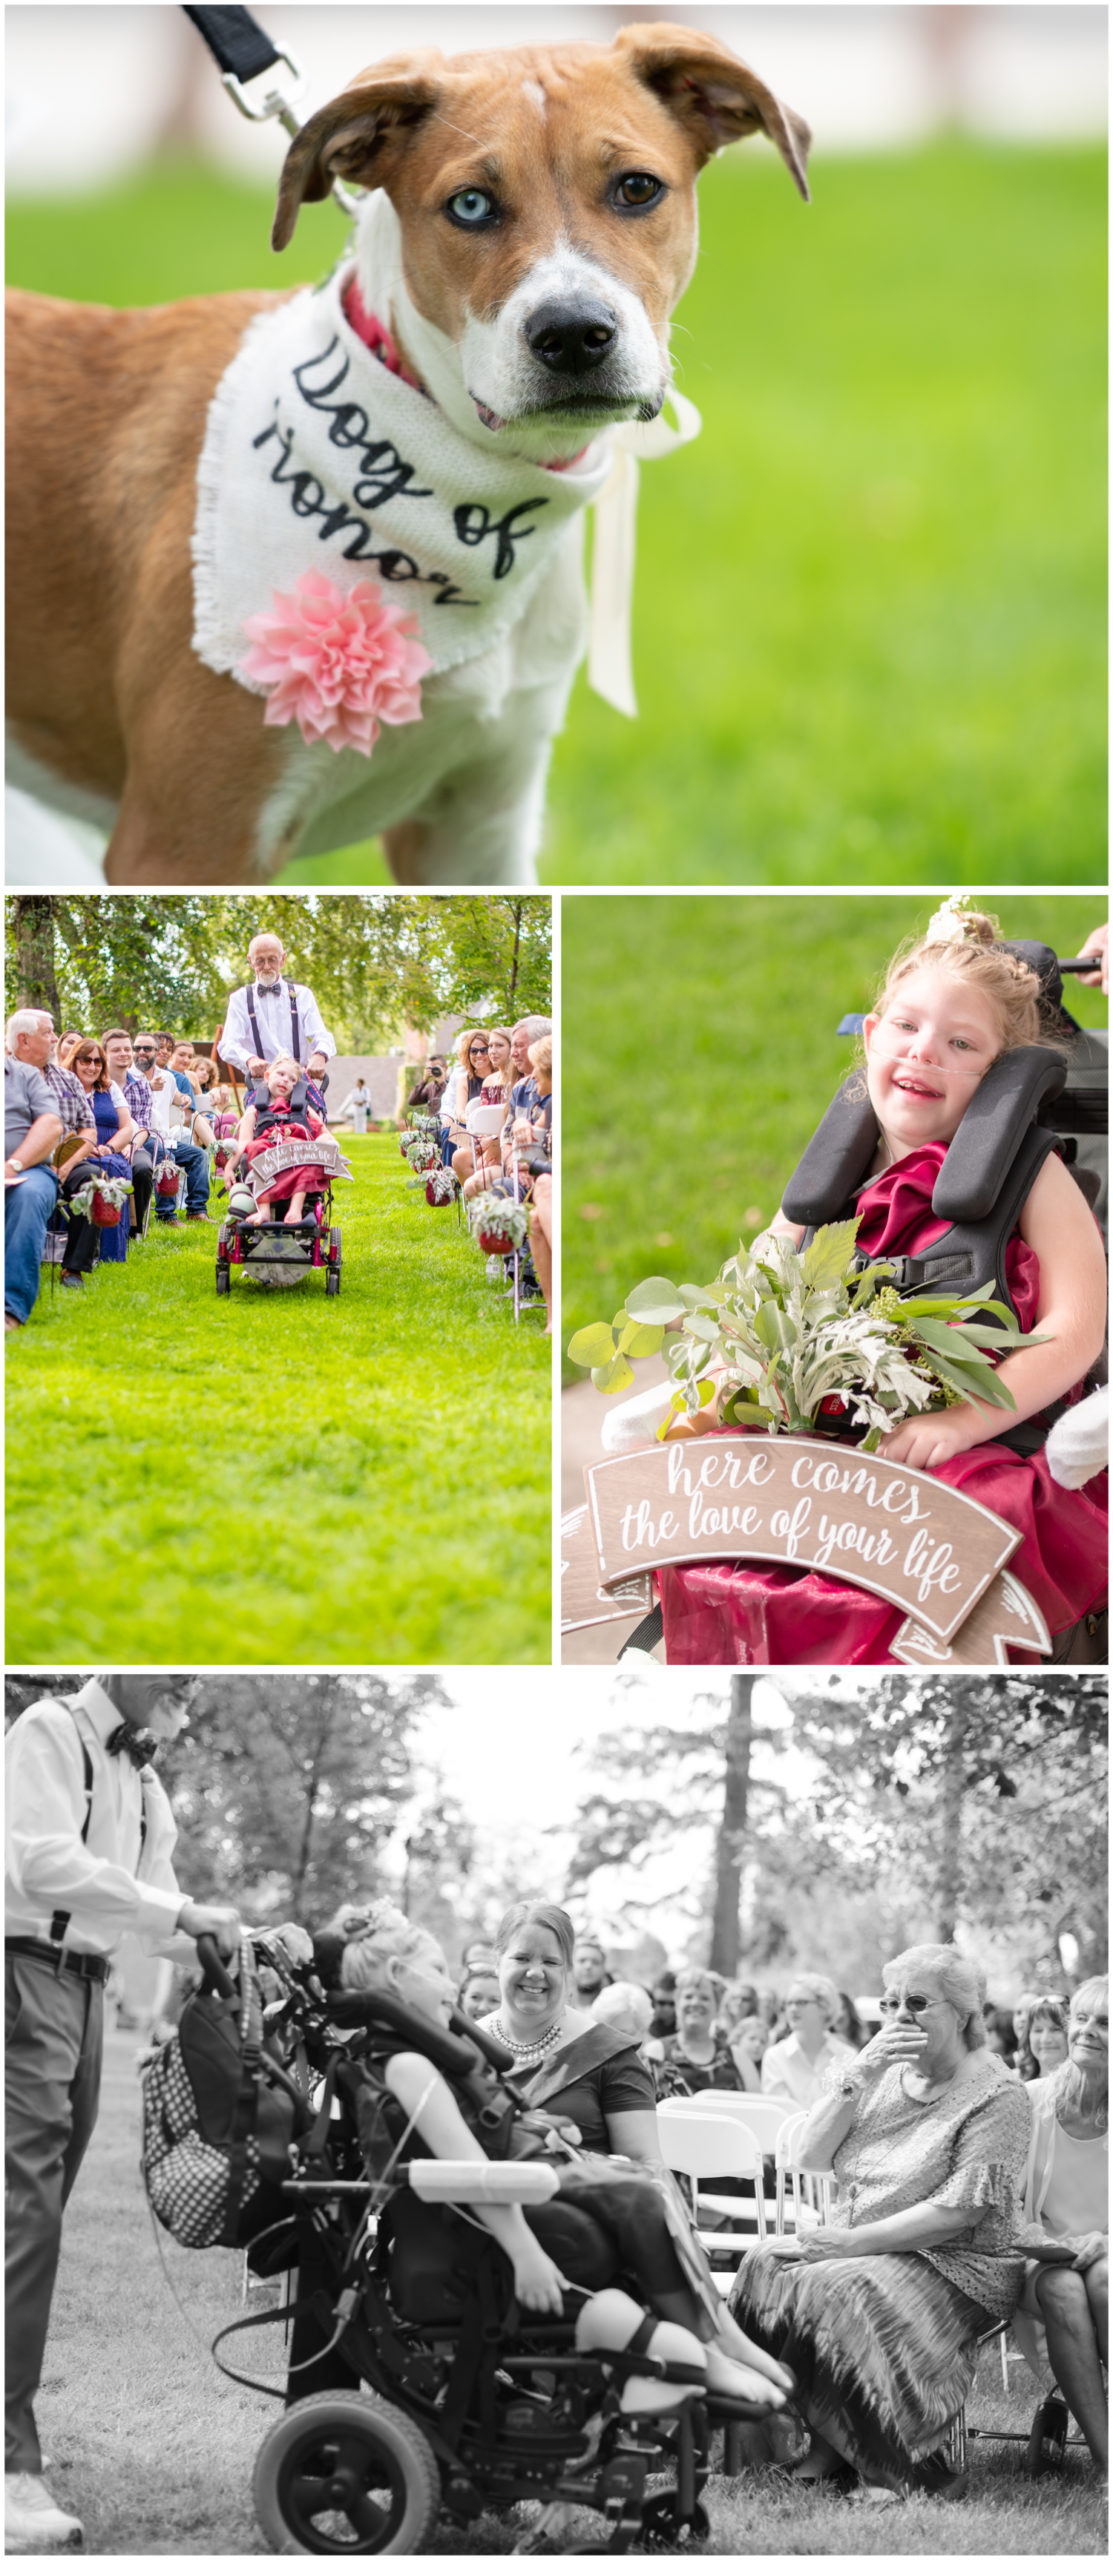 Summer Wedding in Greeley at Glenmere Park and The Armory | Britni Girard Photography - Wedding Photographer - Bride and Groom Classic Car